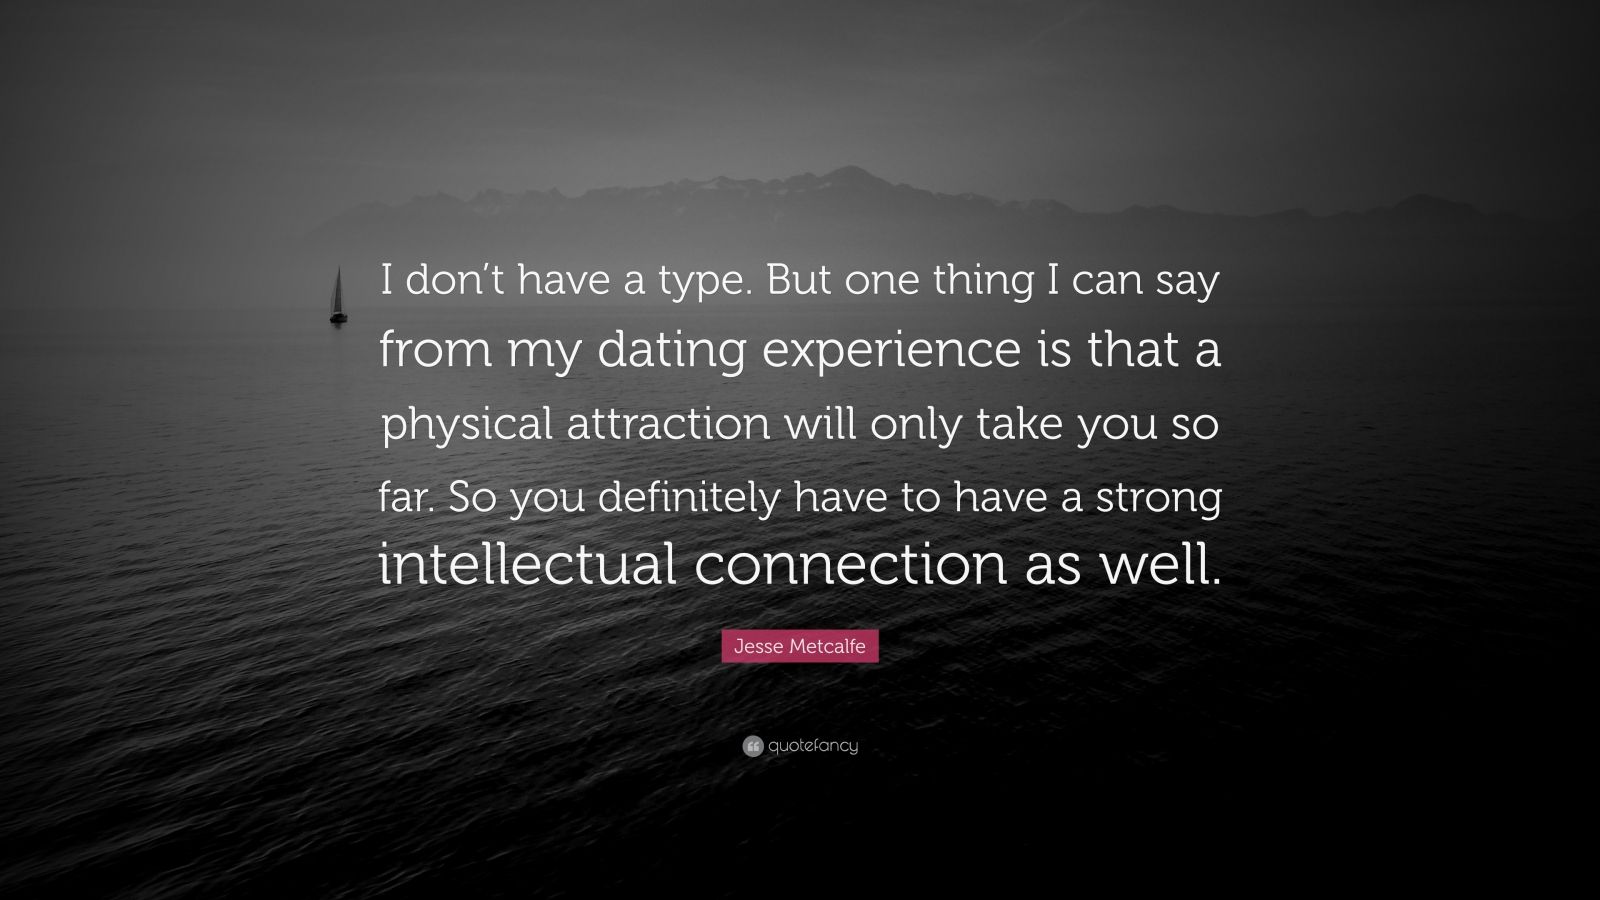 Jesse Metcalfe Quote “i Dont Have A Type But One Thing I Can Say From My Dating Experience Is 